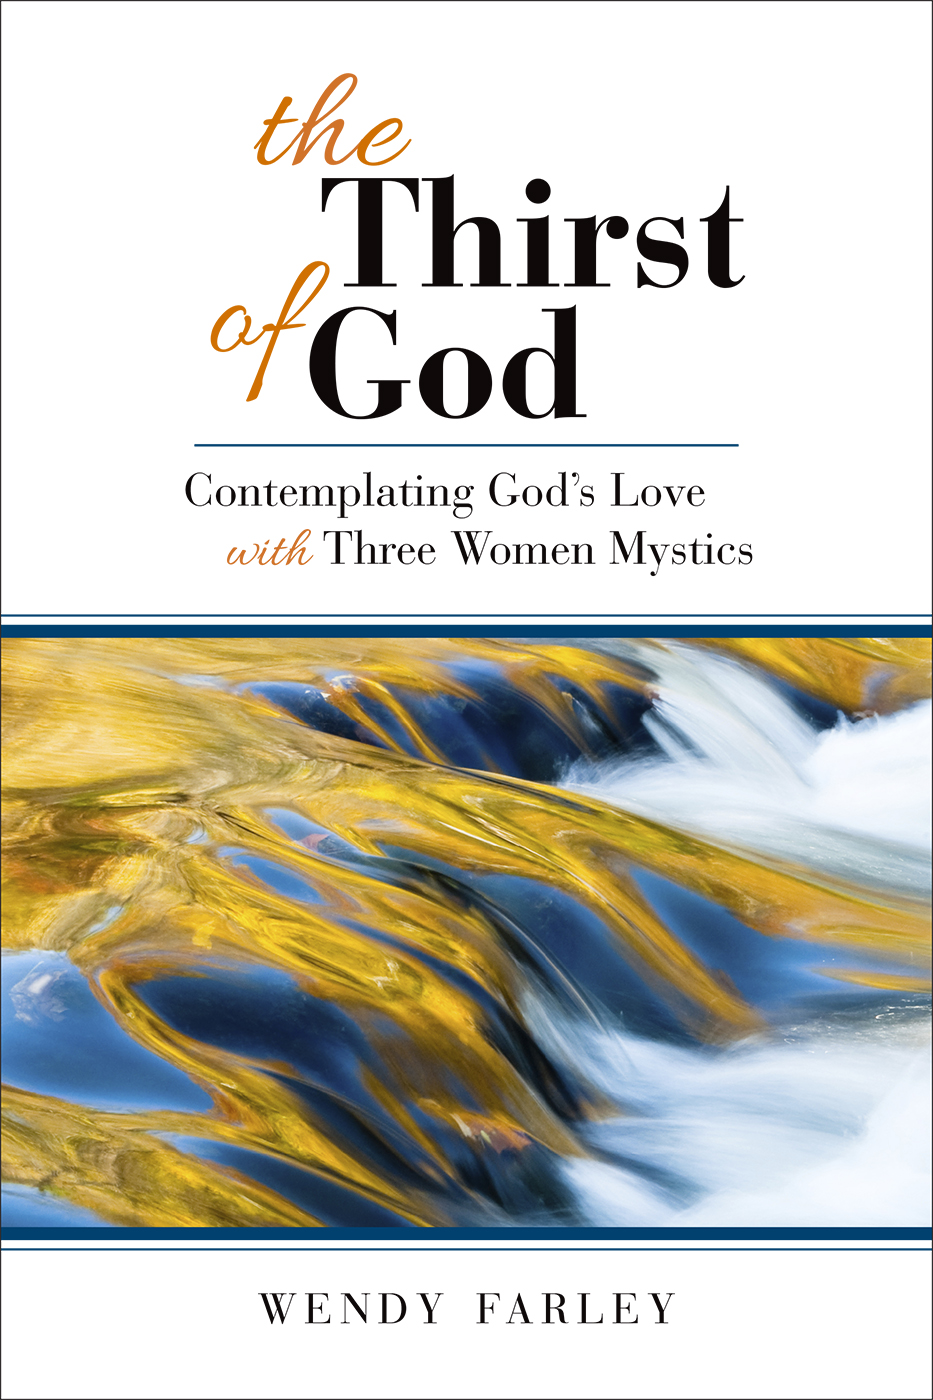 The Thirst of God